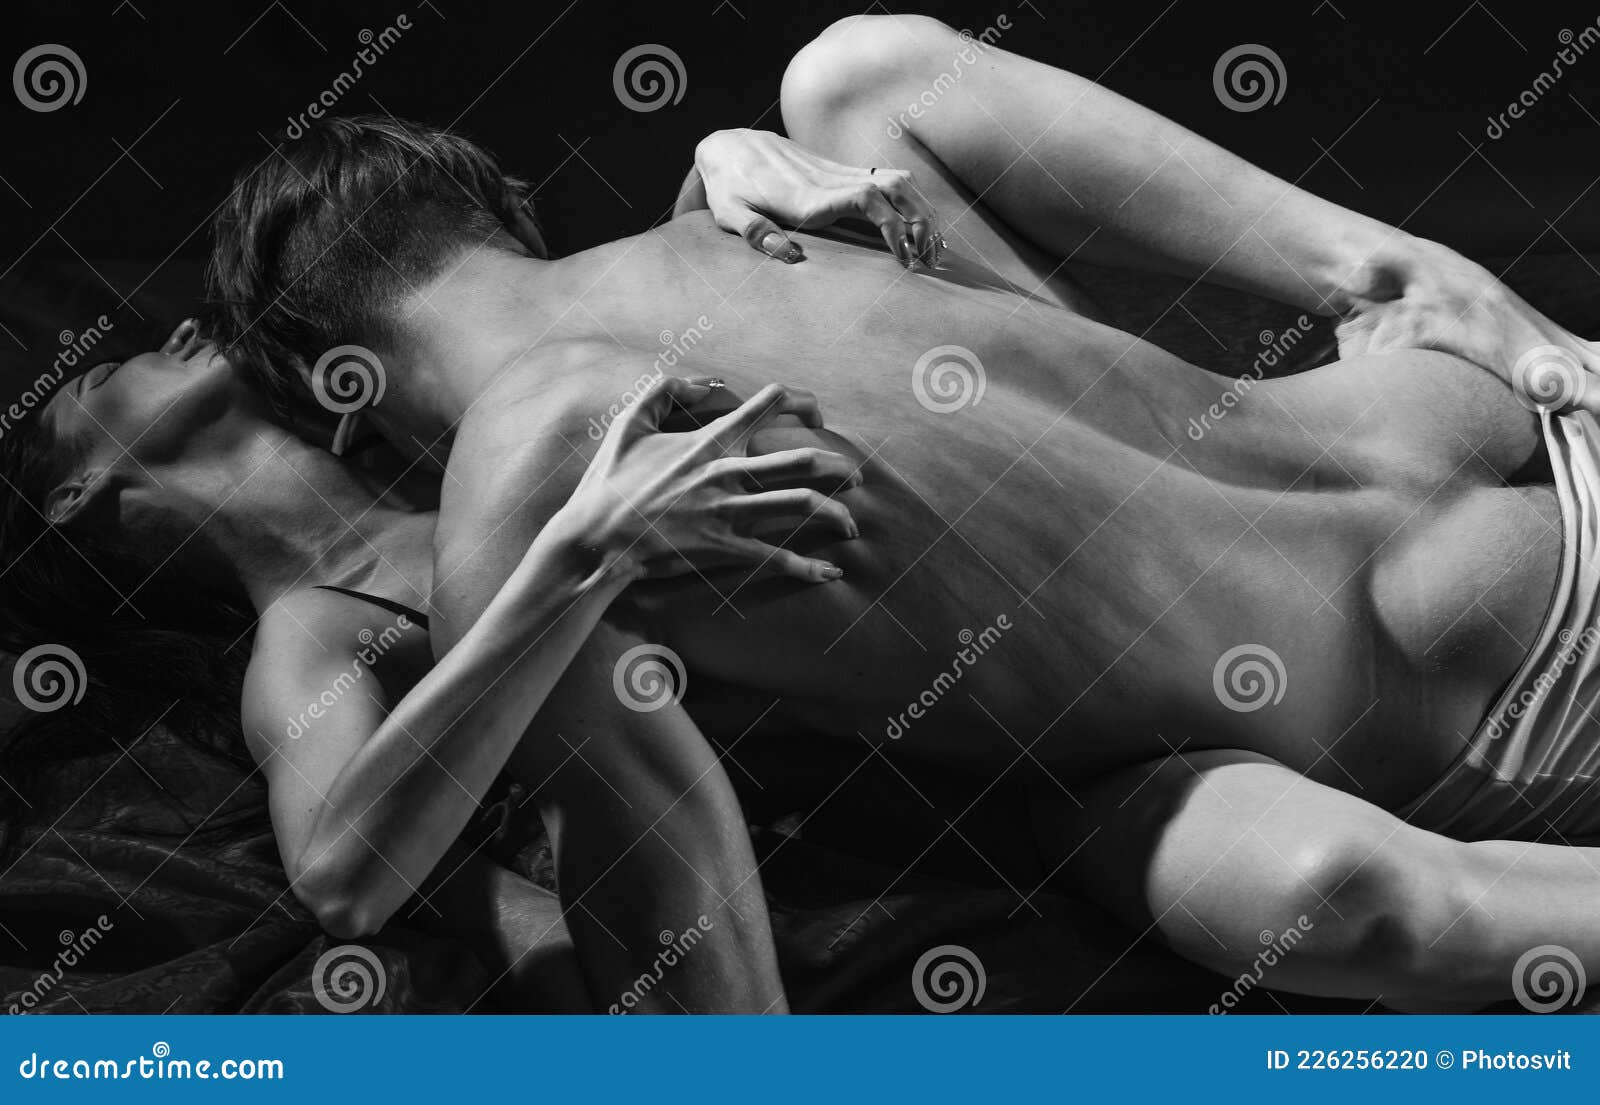 Sensual Couple in Love of Girlfriend and Boyfriend Lovers Having Sex Foreplay with Undressed Body, Passion Stock Photo